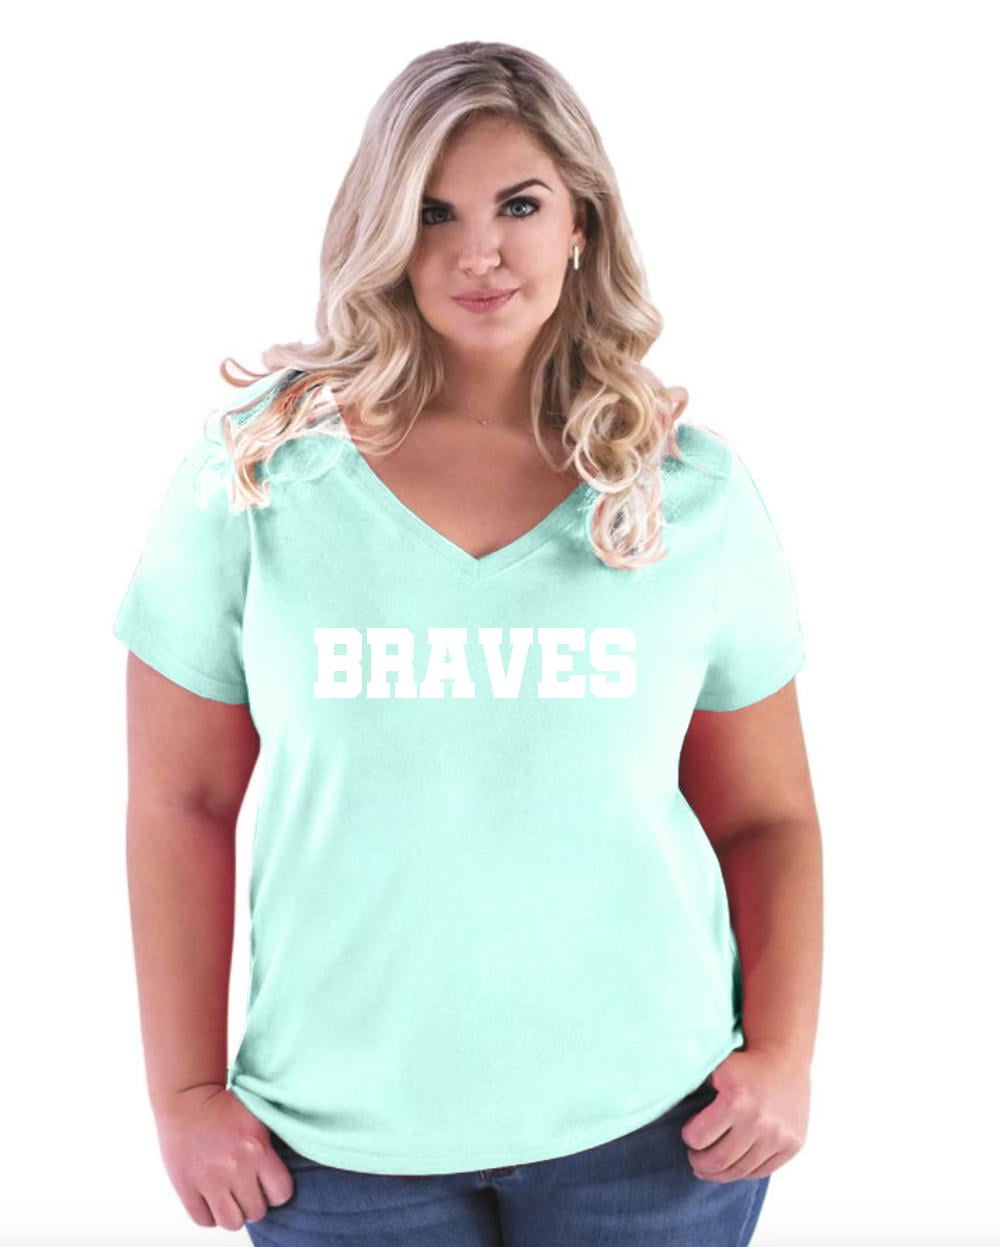 IWPF - Women's Plus Size V-neck T-Shirt, up to Size 28 - Braves 